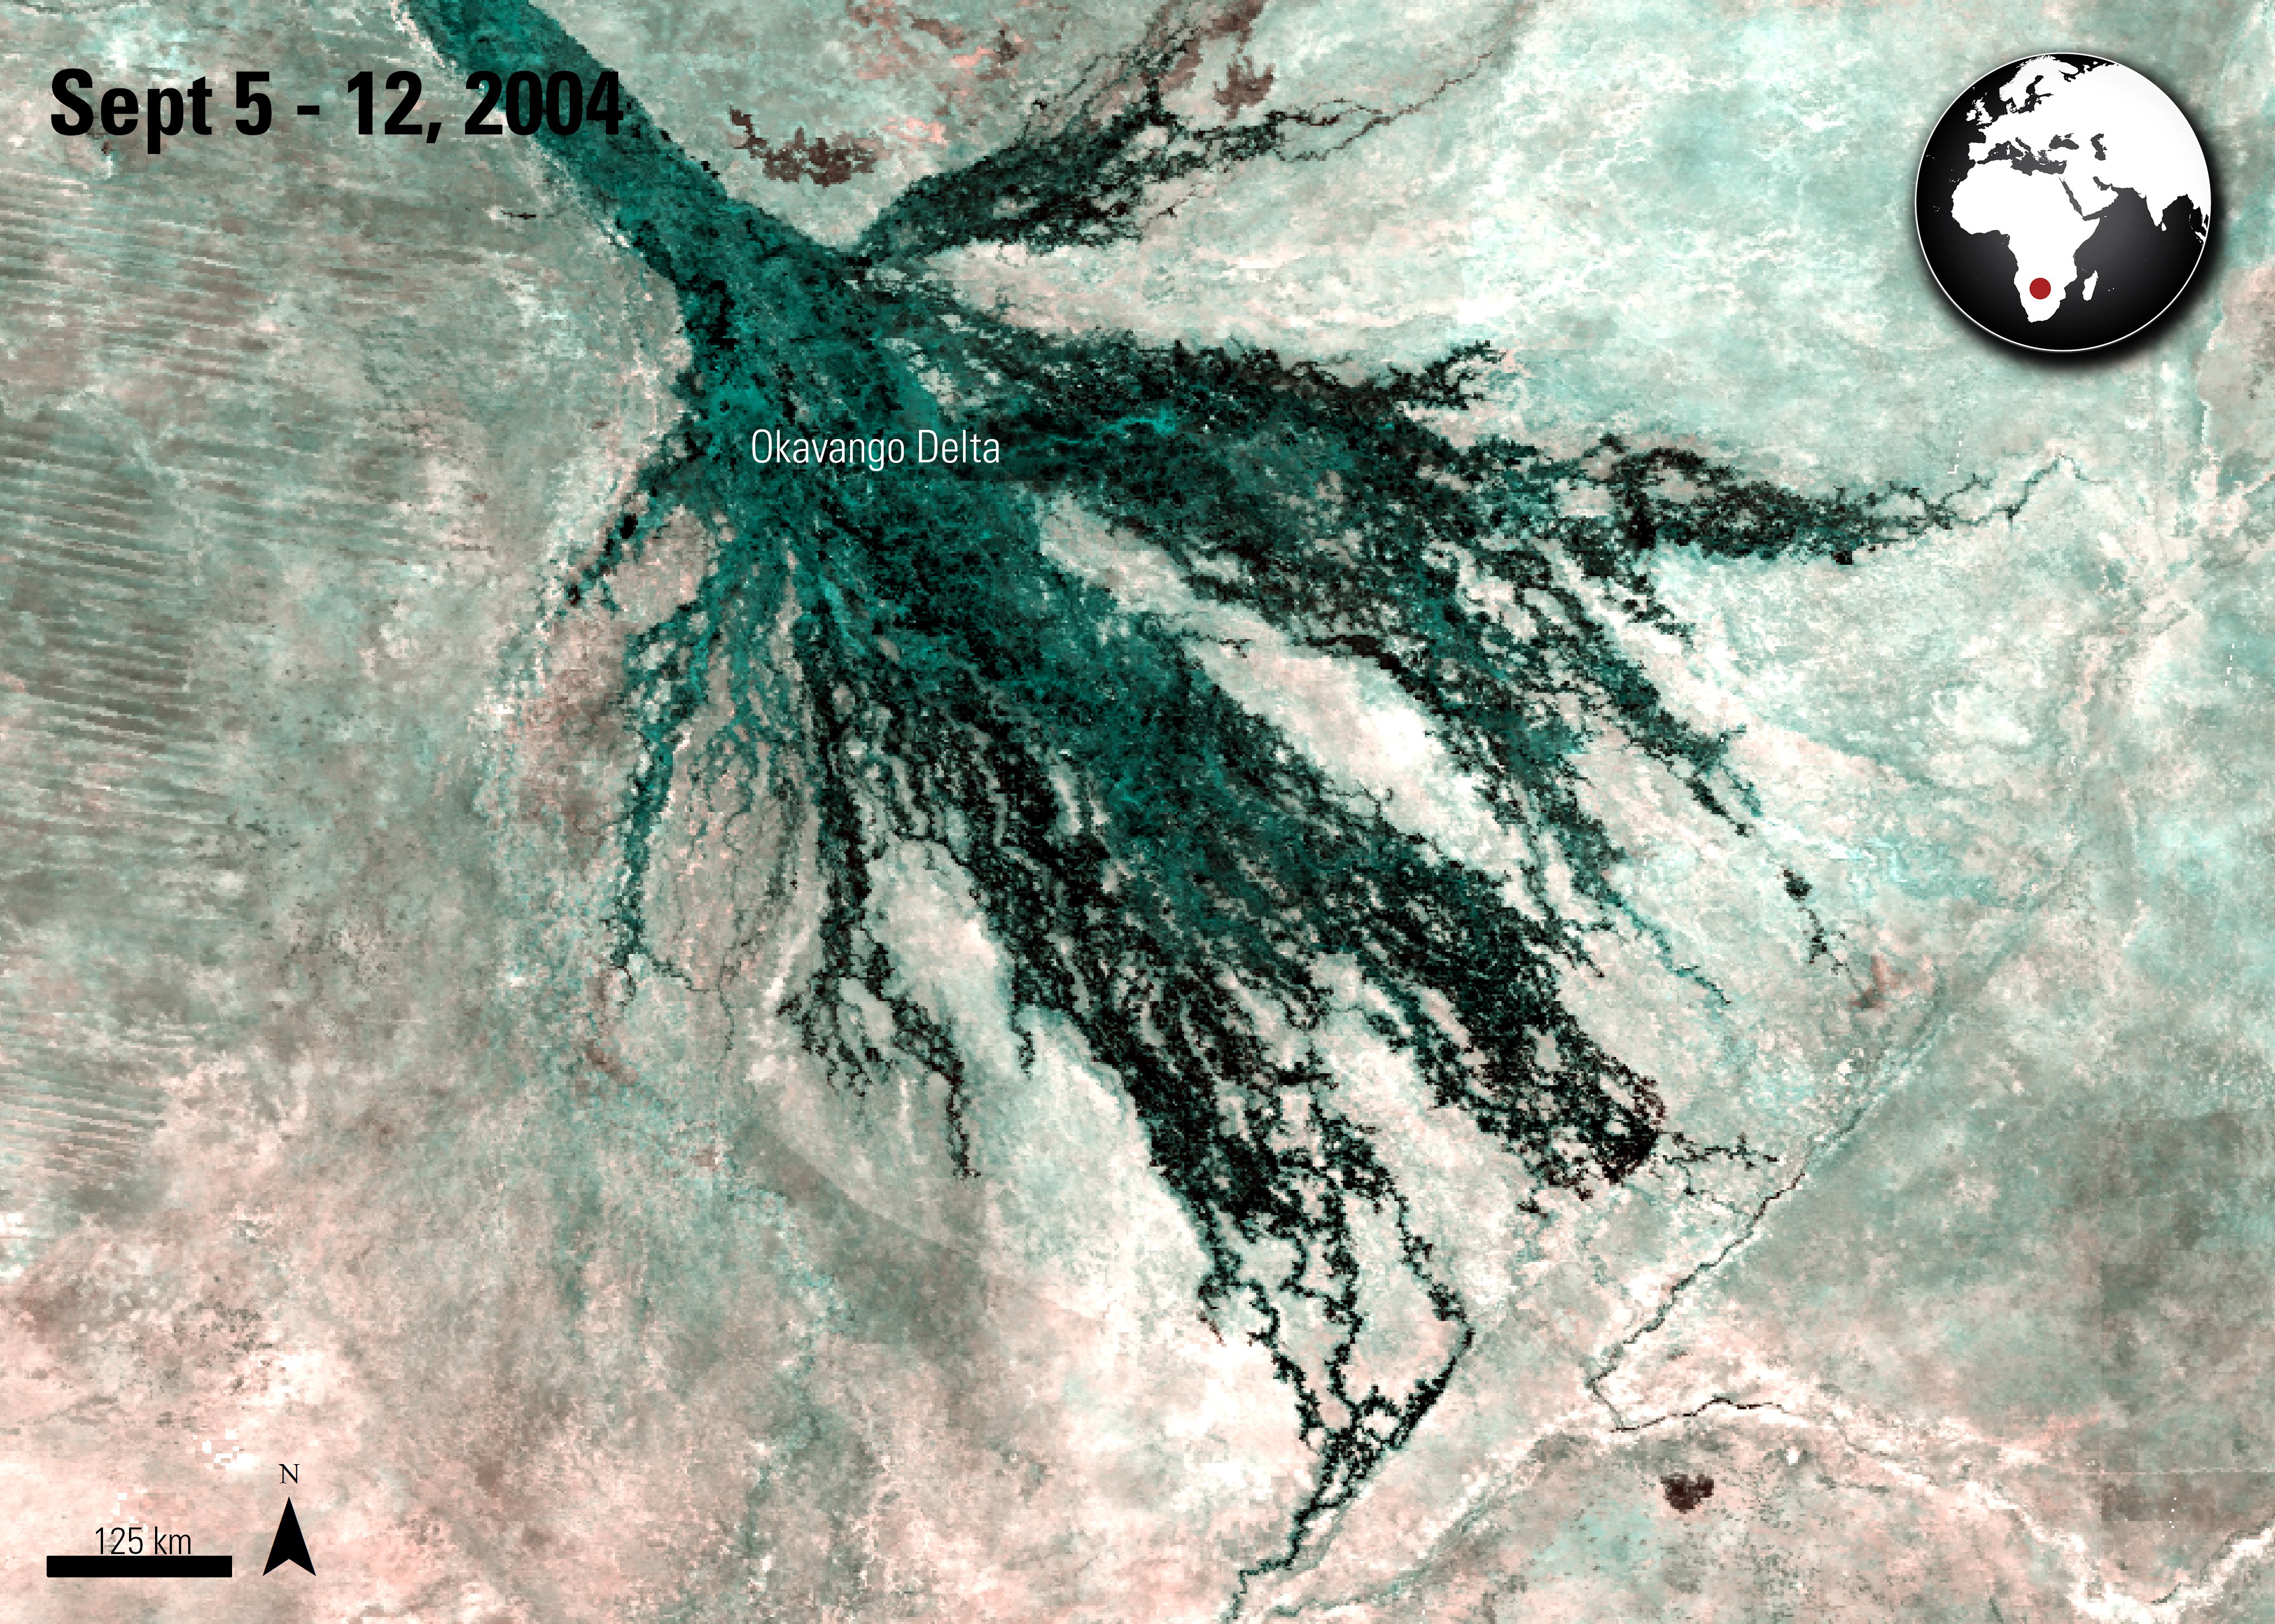 Terra MODIS Surface Reflectance data over the Okavango Delta, Botswana, acquired between September 5 and 12, 2004.